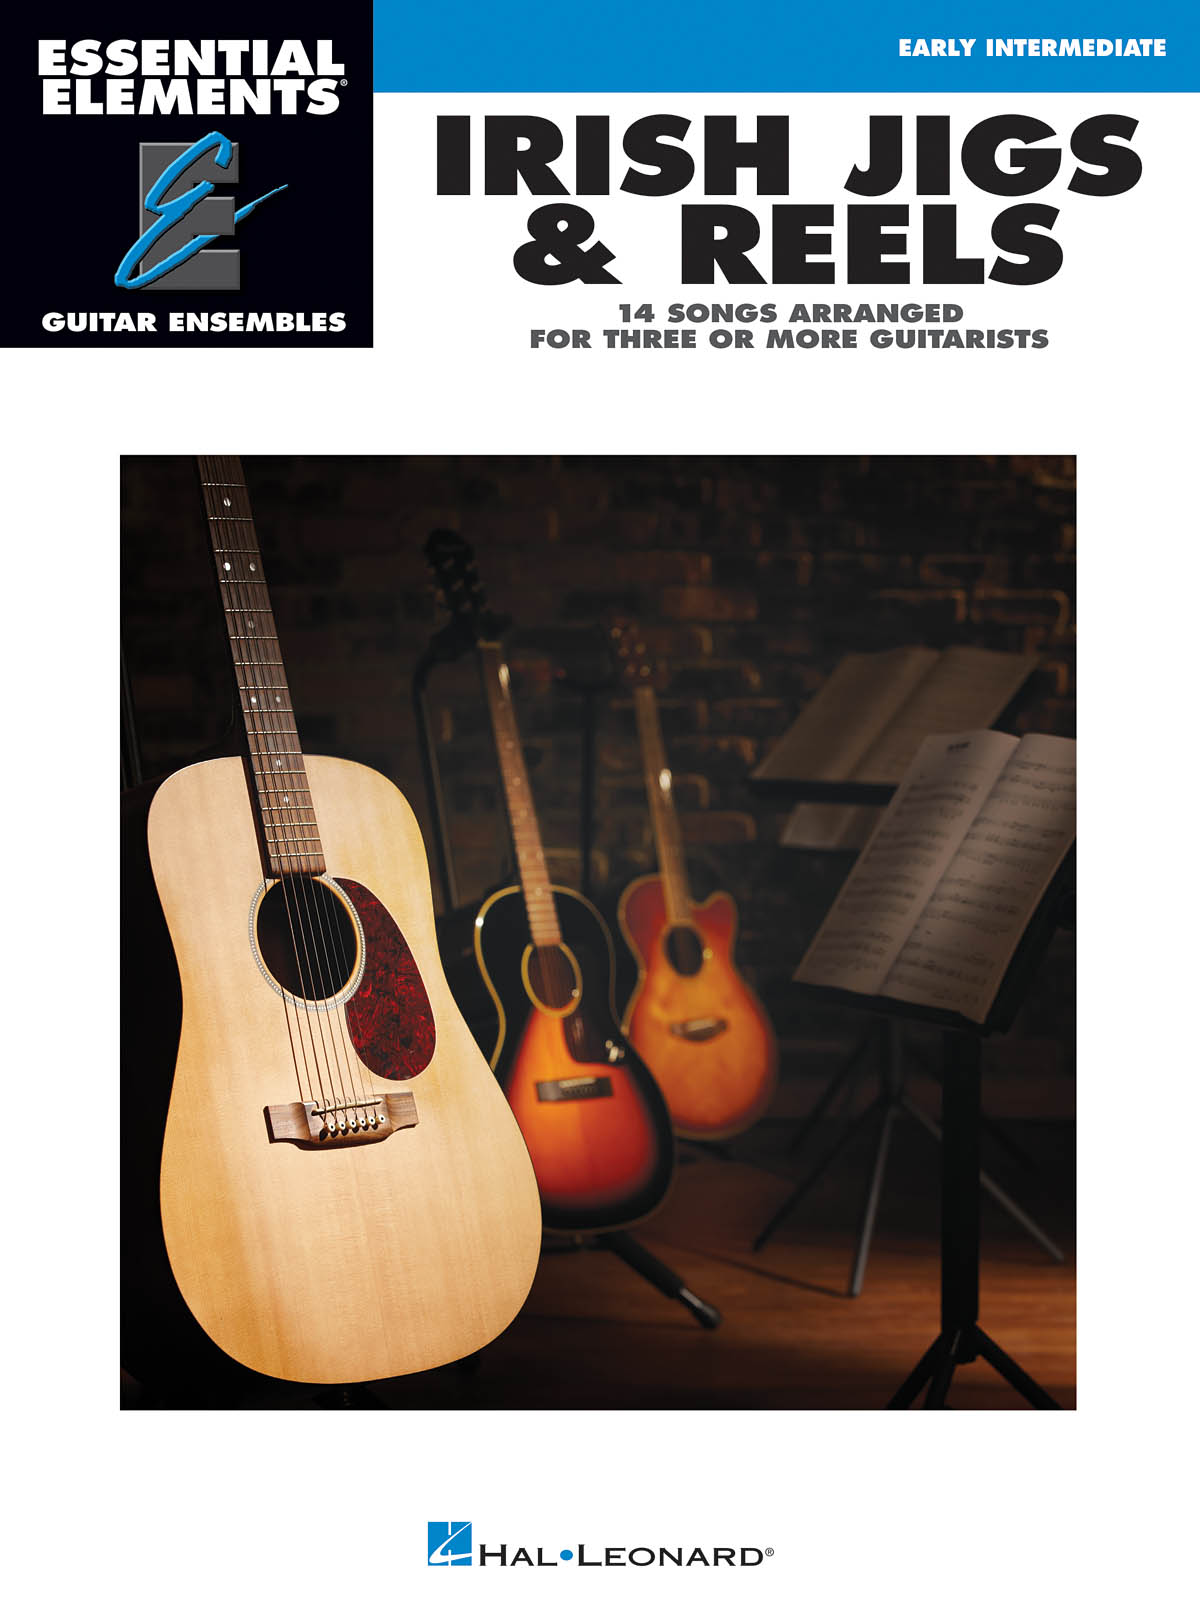 Essential Elements Guitar Ens - Irish Jigs & Reels - 14 Songs Arranged For Three or More Guitarists